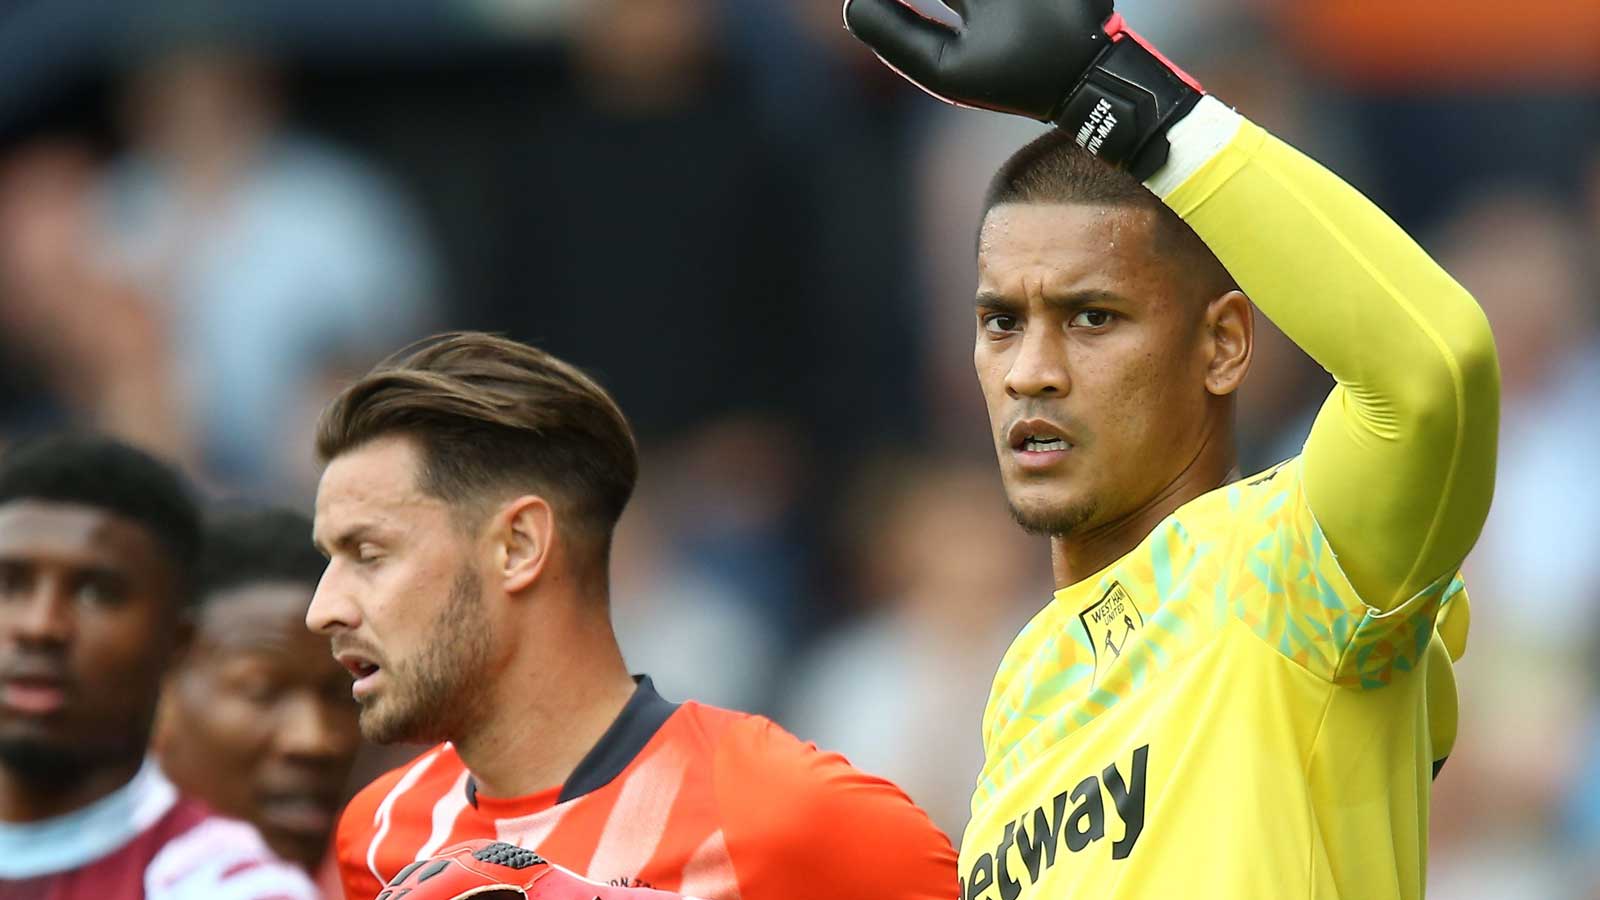 Alphonse Areola in action at Luton